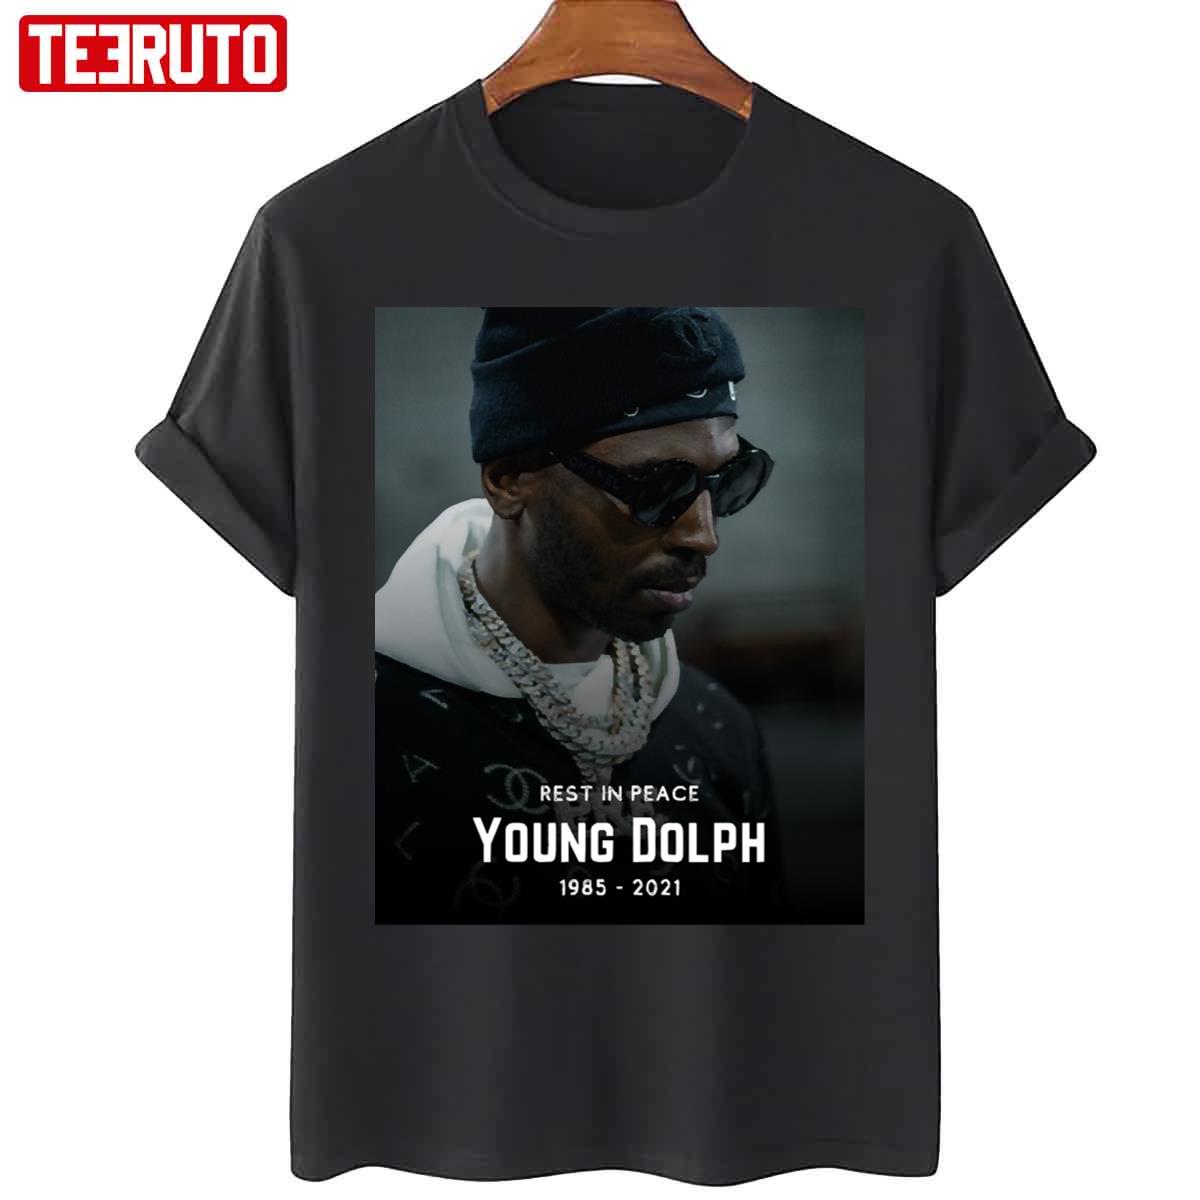 Young Dolph Vintage RIP 2021 Unisex T-Shirt - Teeruto